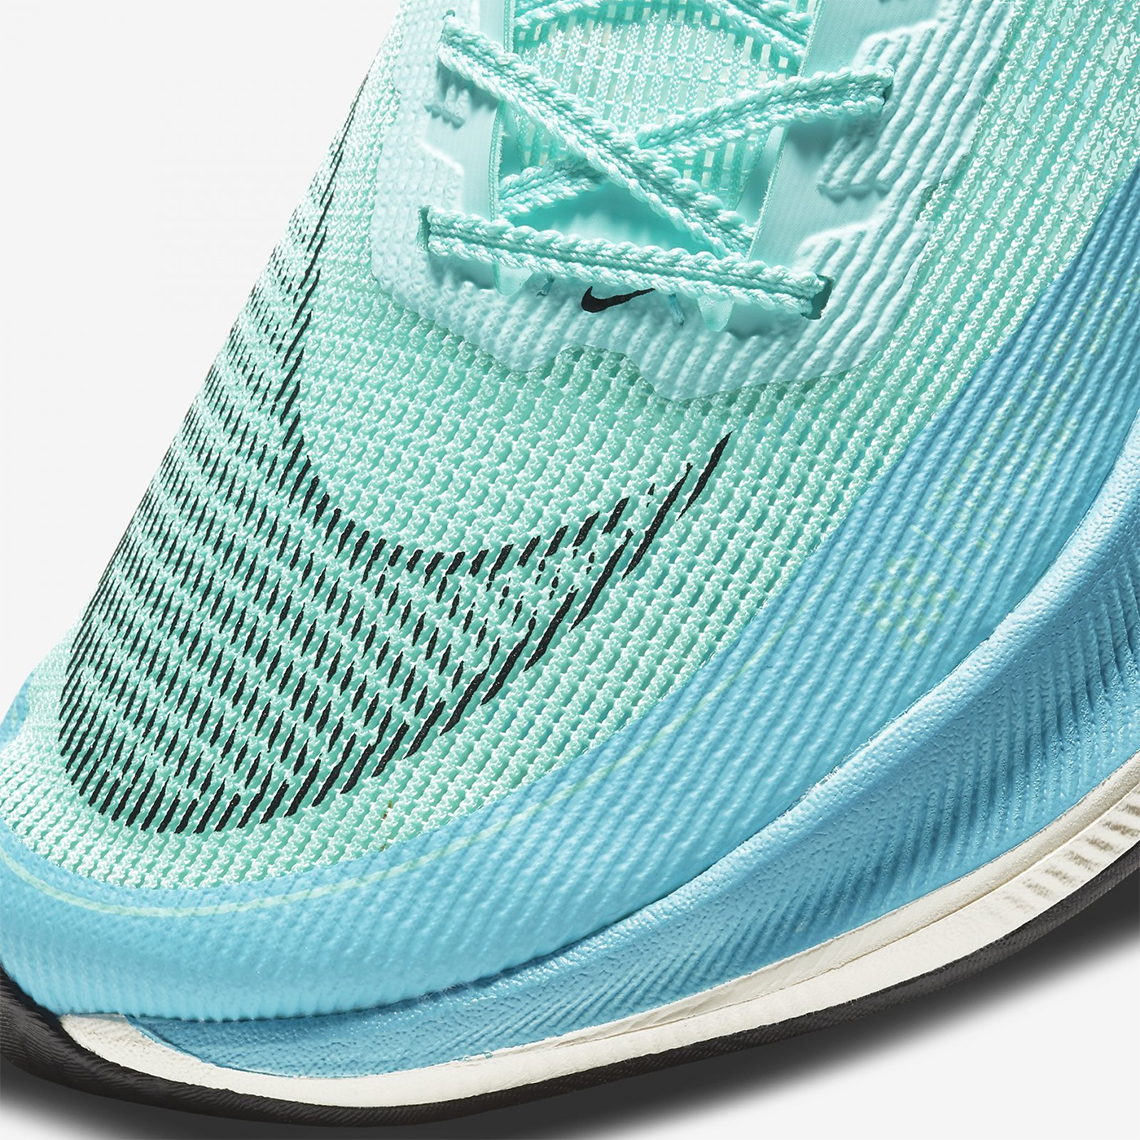 Nike Zoom Vaporfly Next Percent 2 2021 Release Date 7